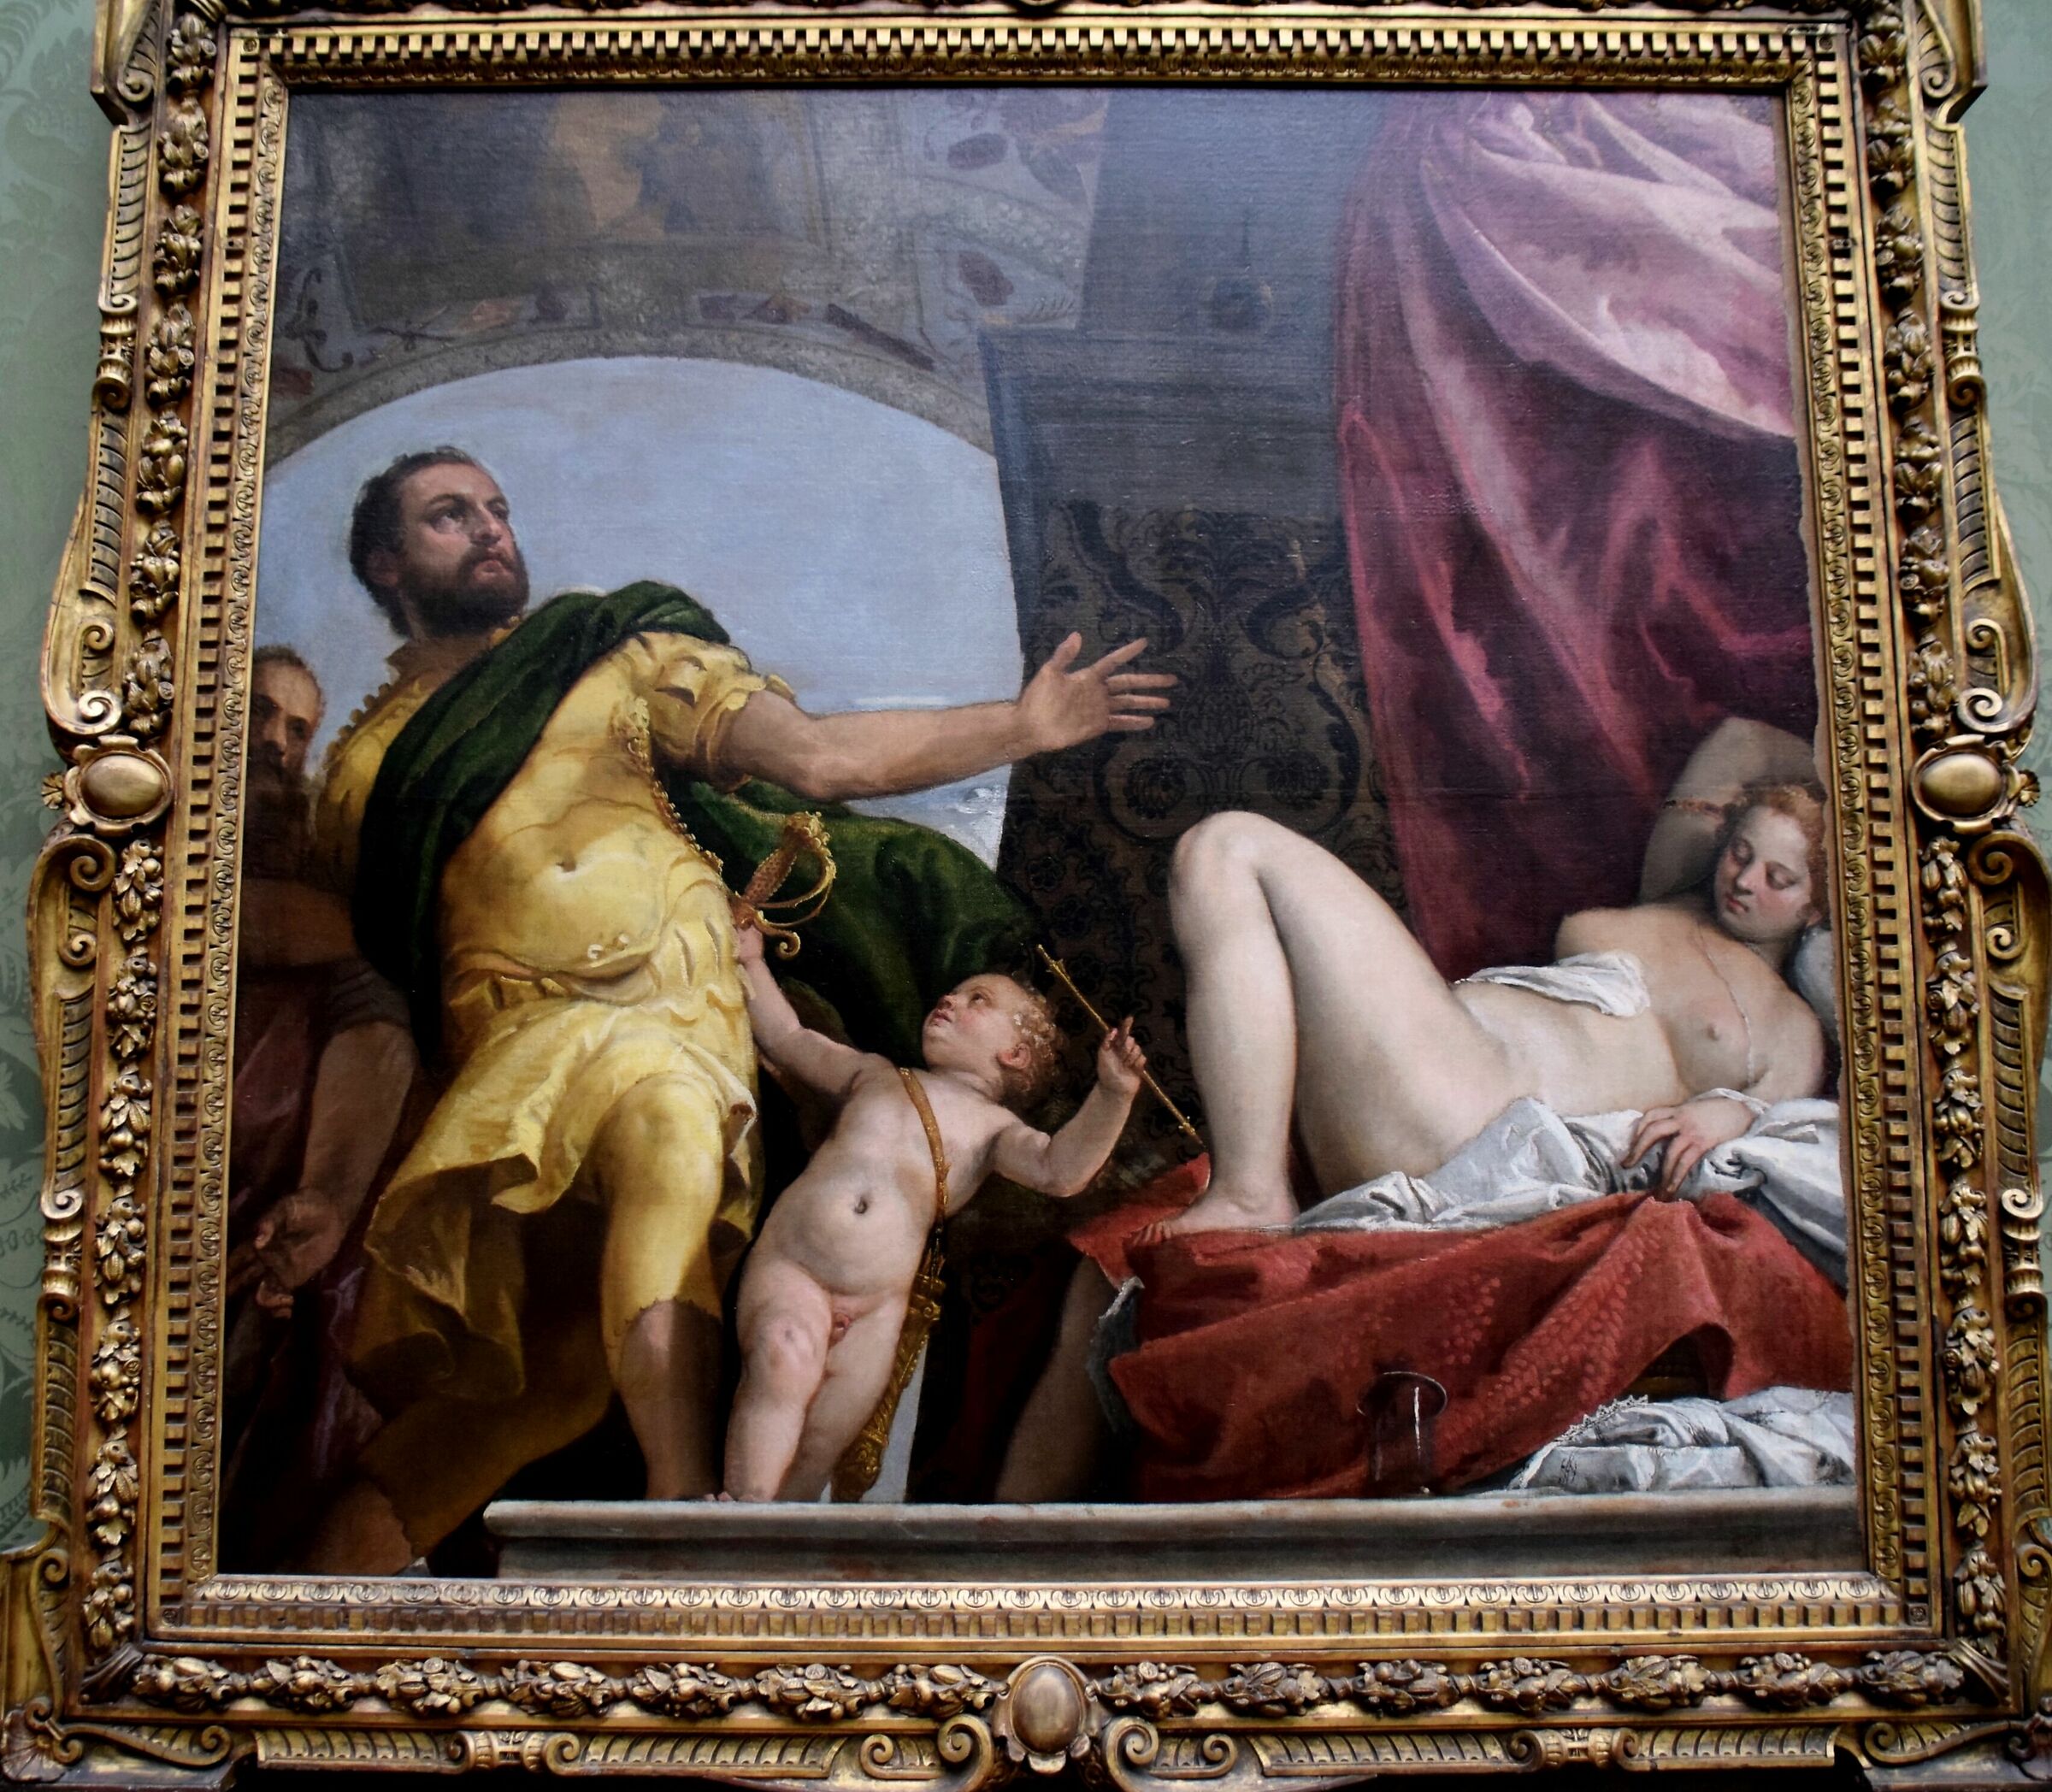 National Gallery - Paolo Veronese "Respect"...